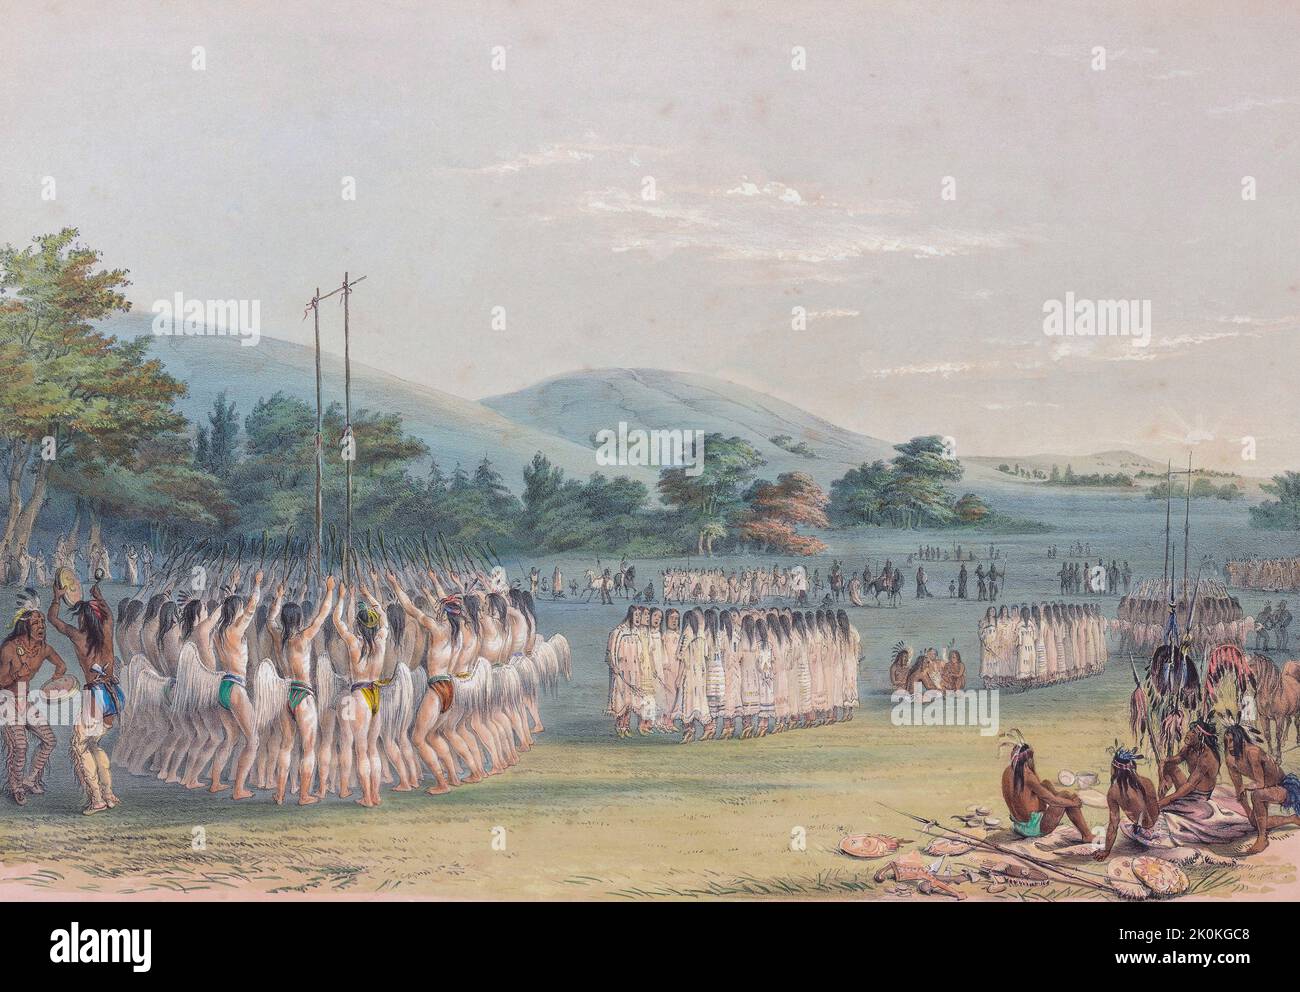 A Choctaw Ball Play Dance.  From Catlin's North American Indian Portfolio, published in London 1844 by the artist, American adventurer George Catlin, 1796 - 1872.  During many journeys Catlin recorded with pen and brush the customs and life-styles of Native American tribes. Stock Photo